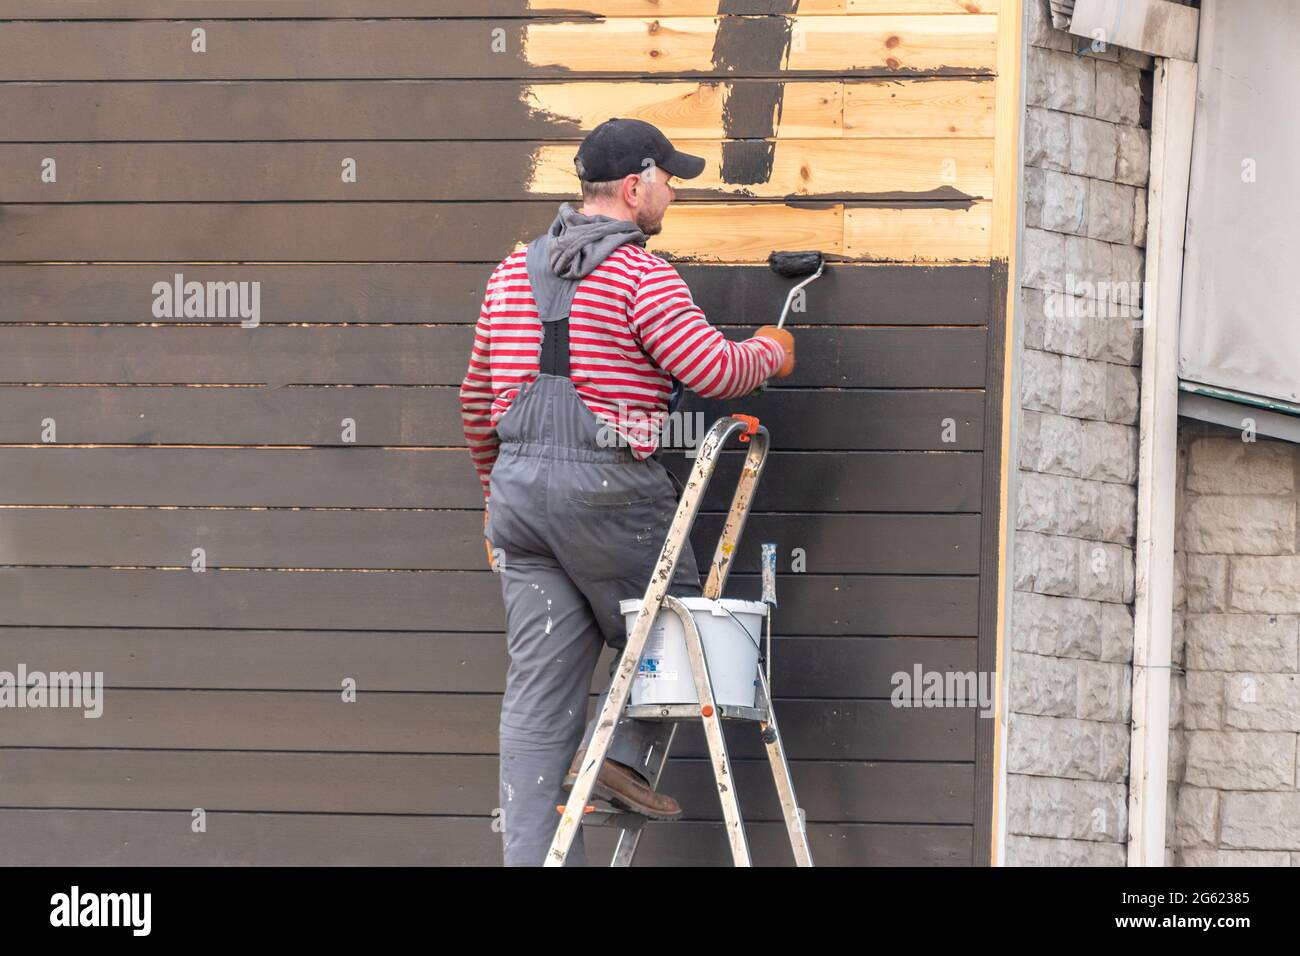 Kiev, Ukraine - April 27, 2021: A man painting wooden wall outside. Stock Photo